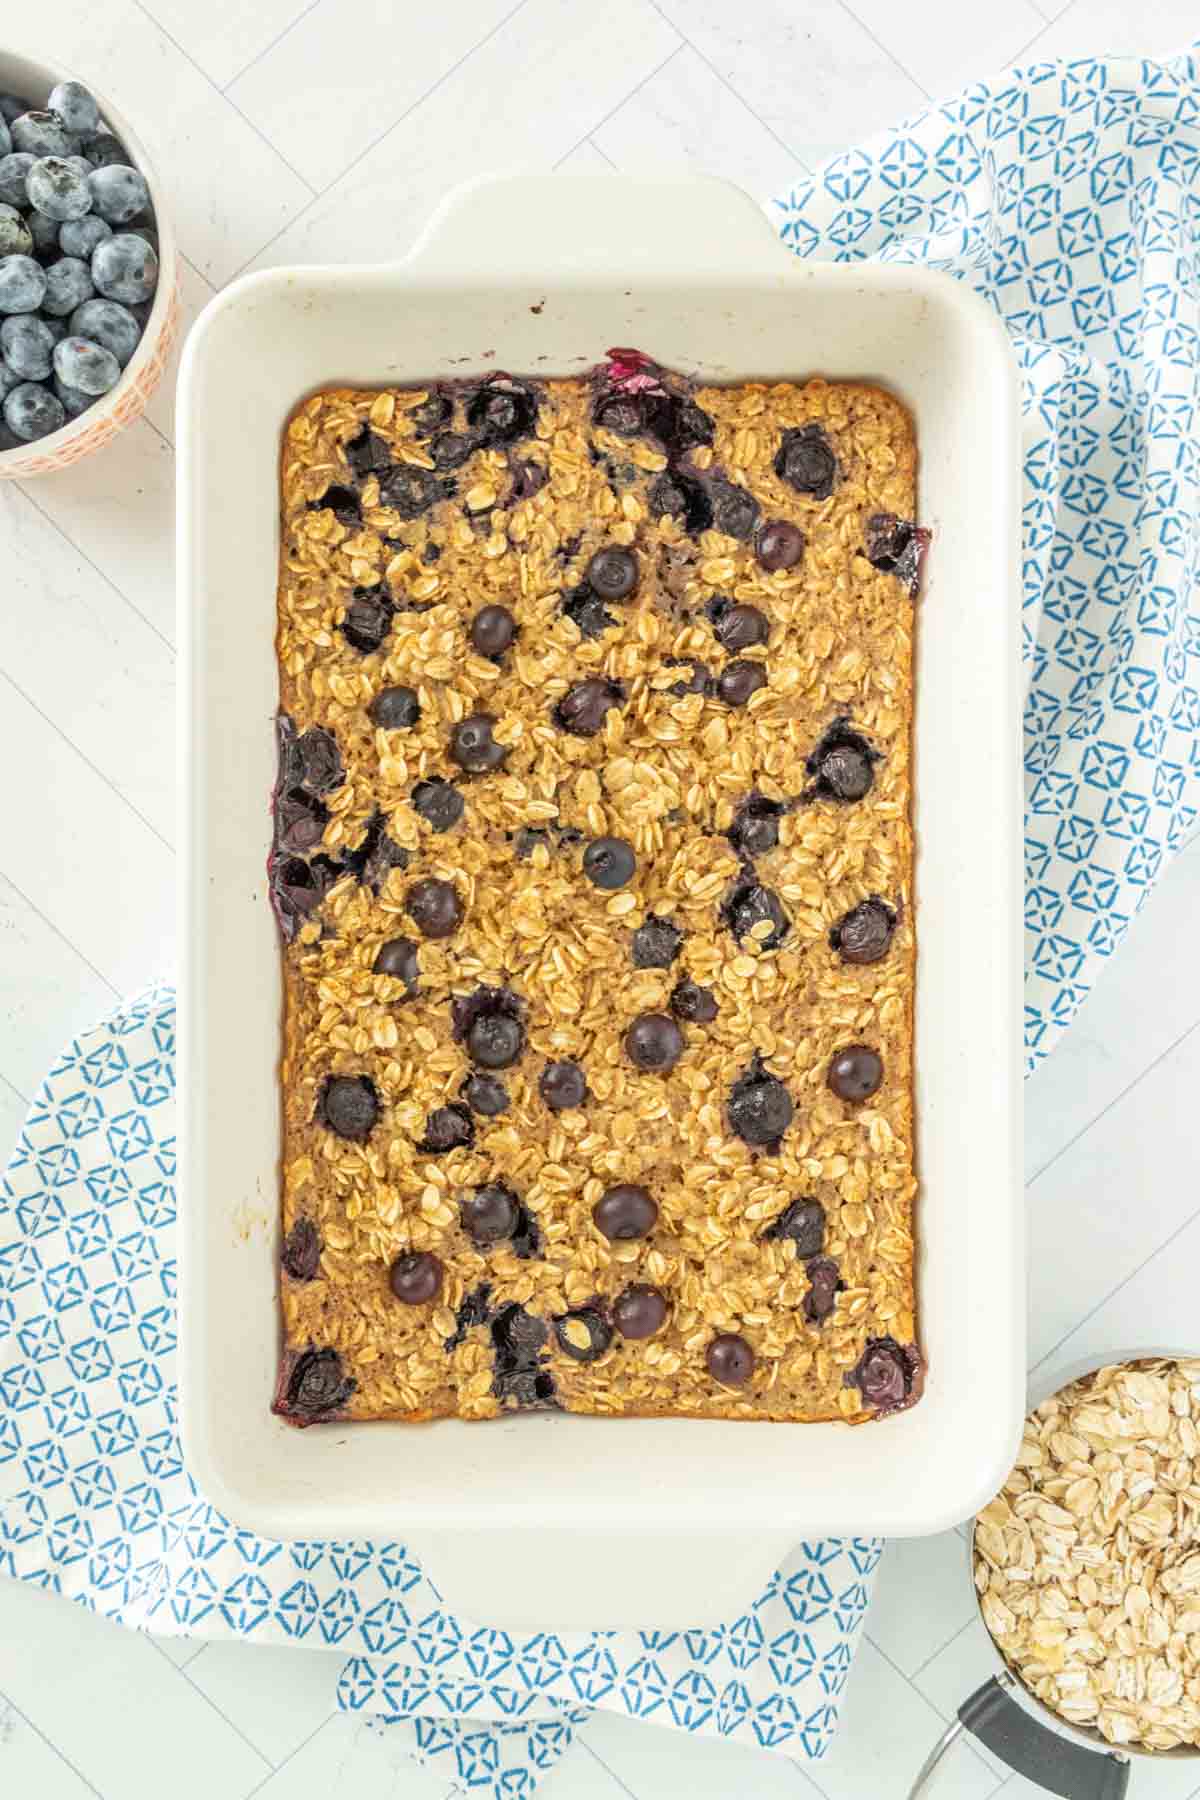 Blueberry oatmeal in a baking dish with blueberries.